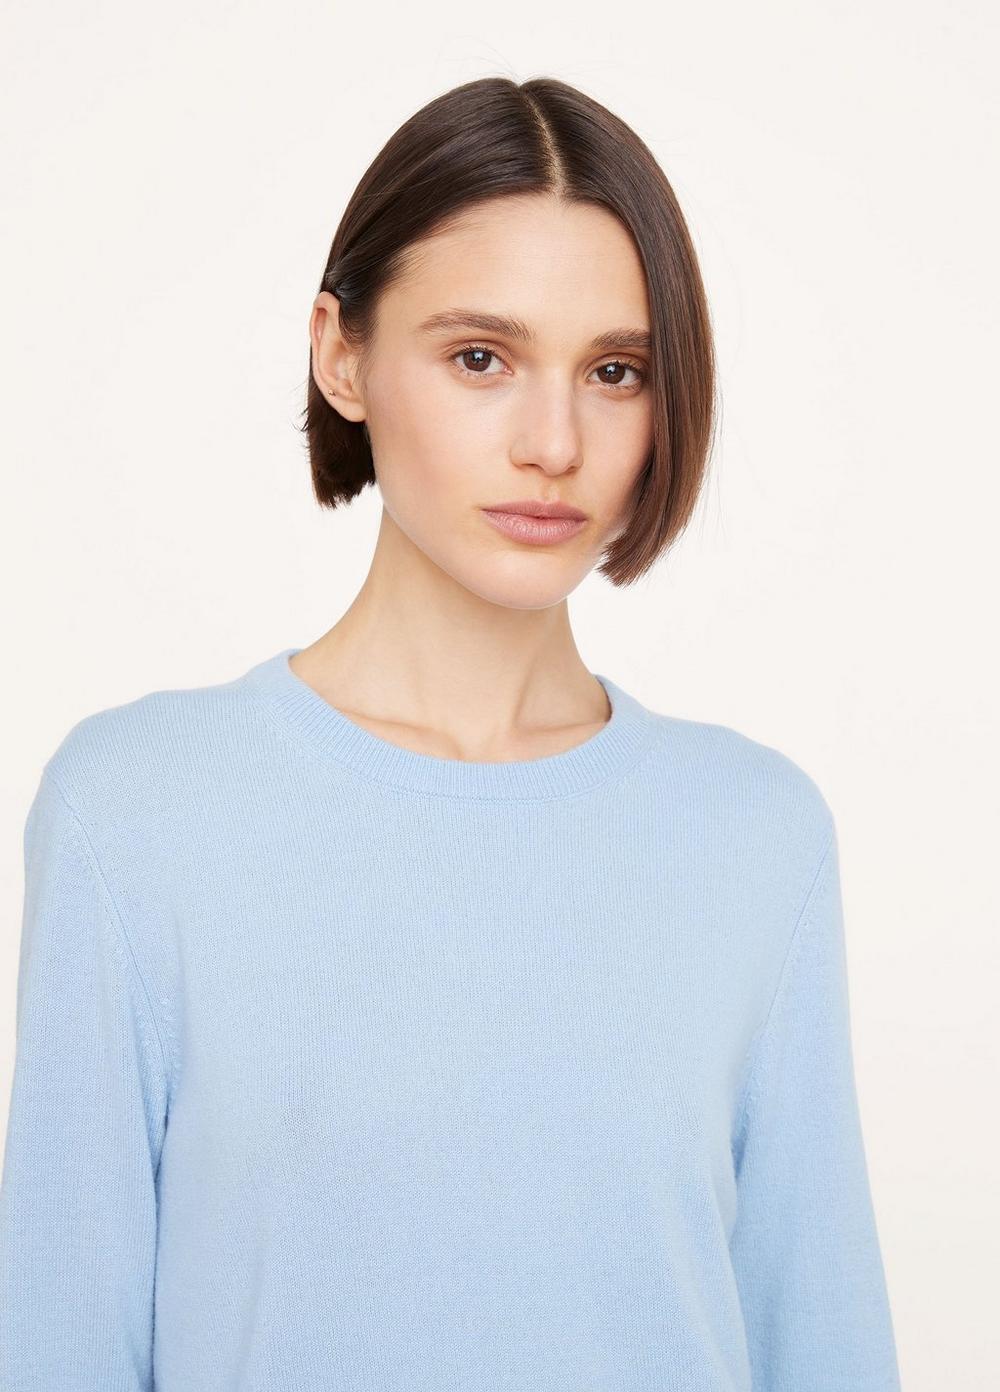 Vince | Cashmere Classic Crew Neck Sweater in Kyanite | Vince Unfold